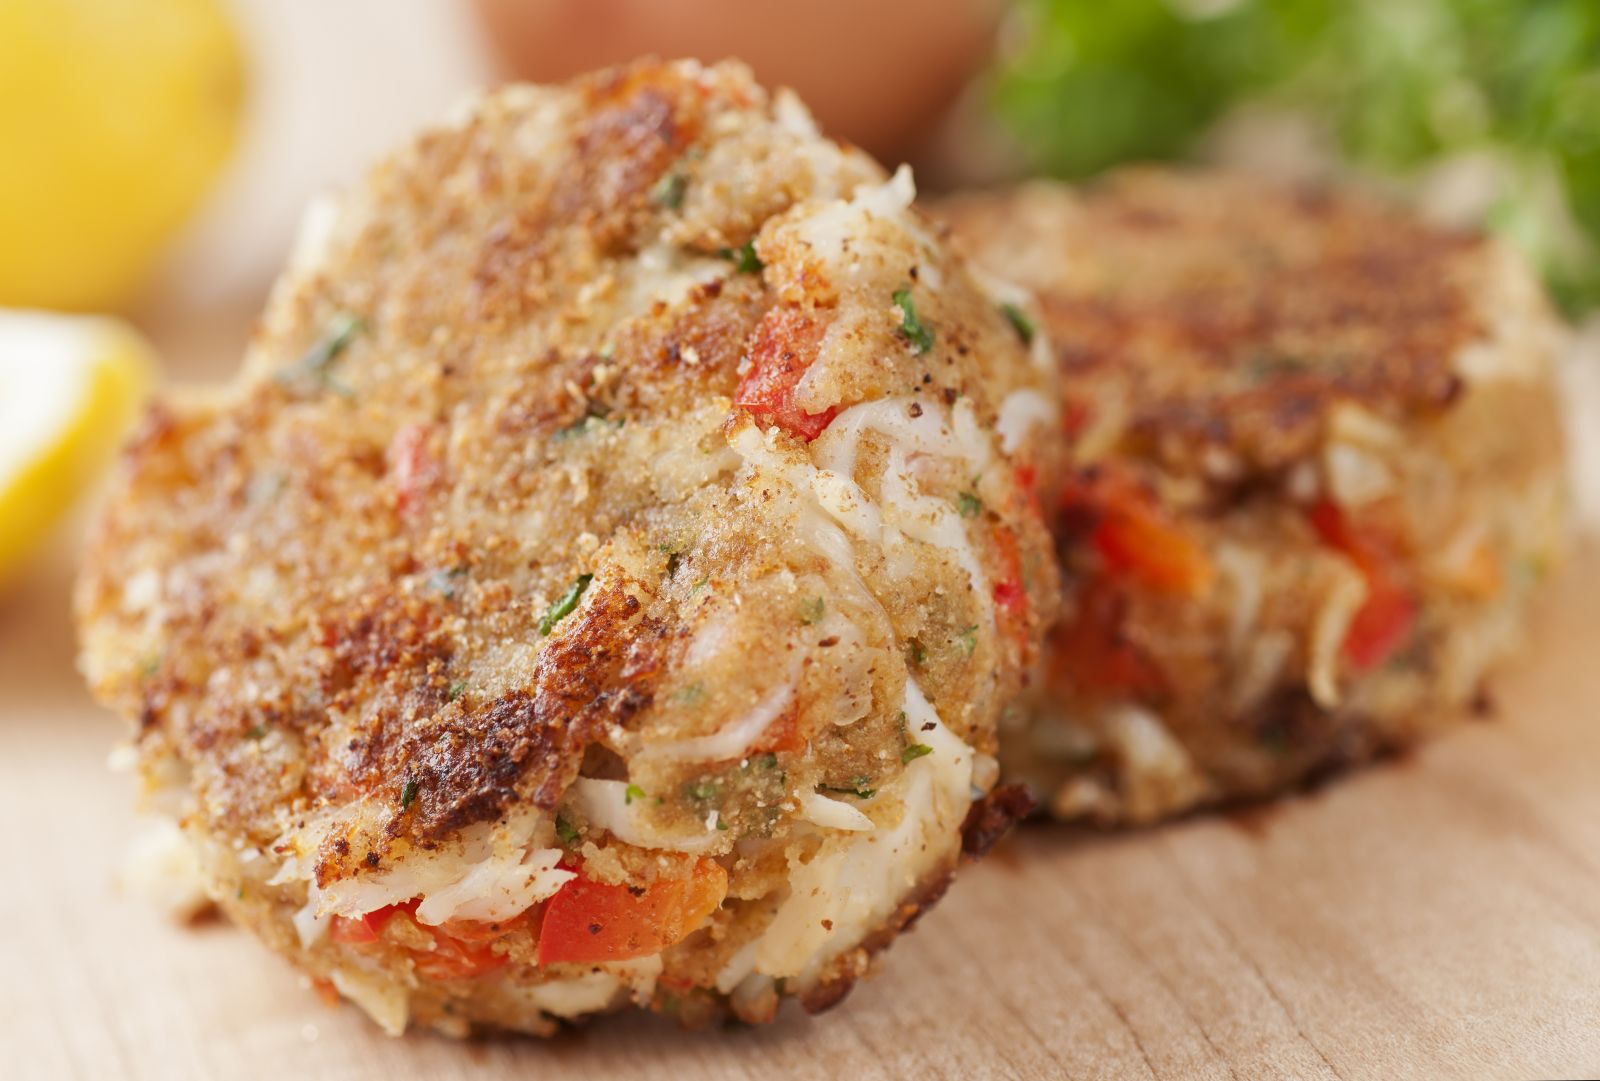 Crab cakes can be found at this Surfside Beach spot.